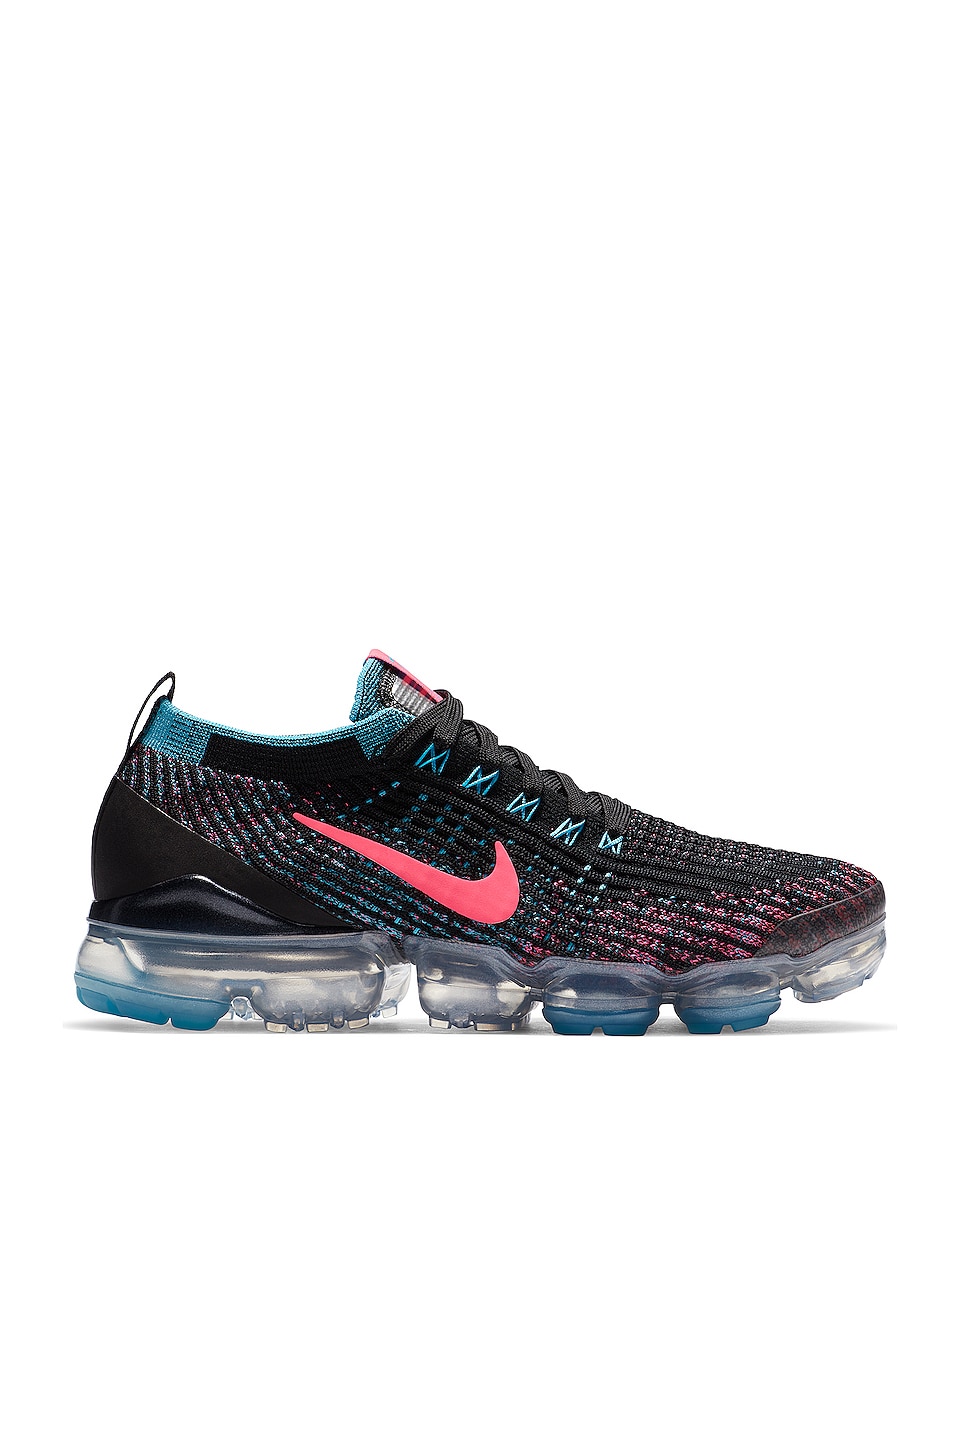 vapormax flyknit 3 pink and black